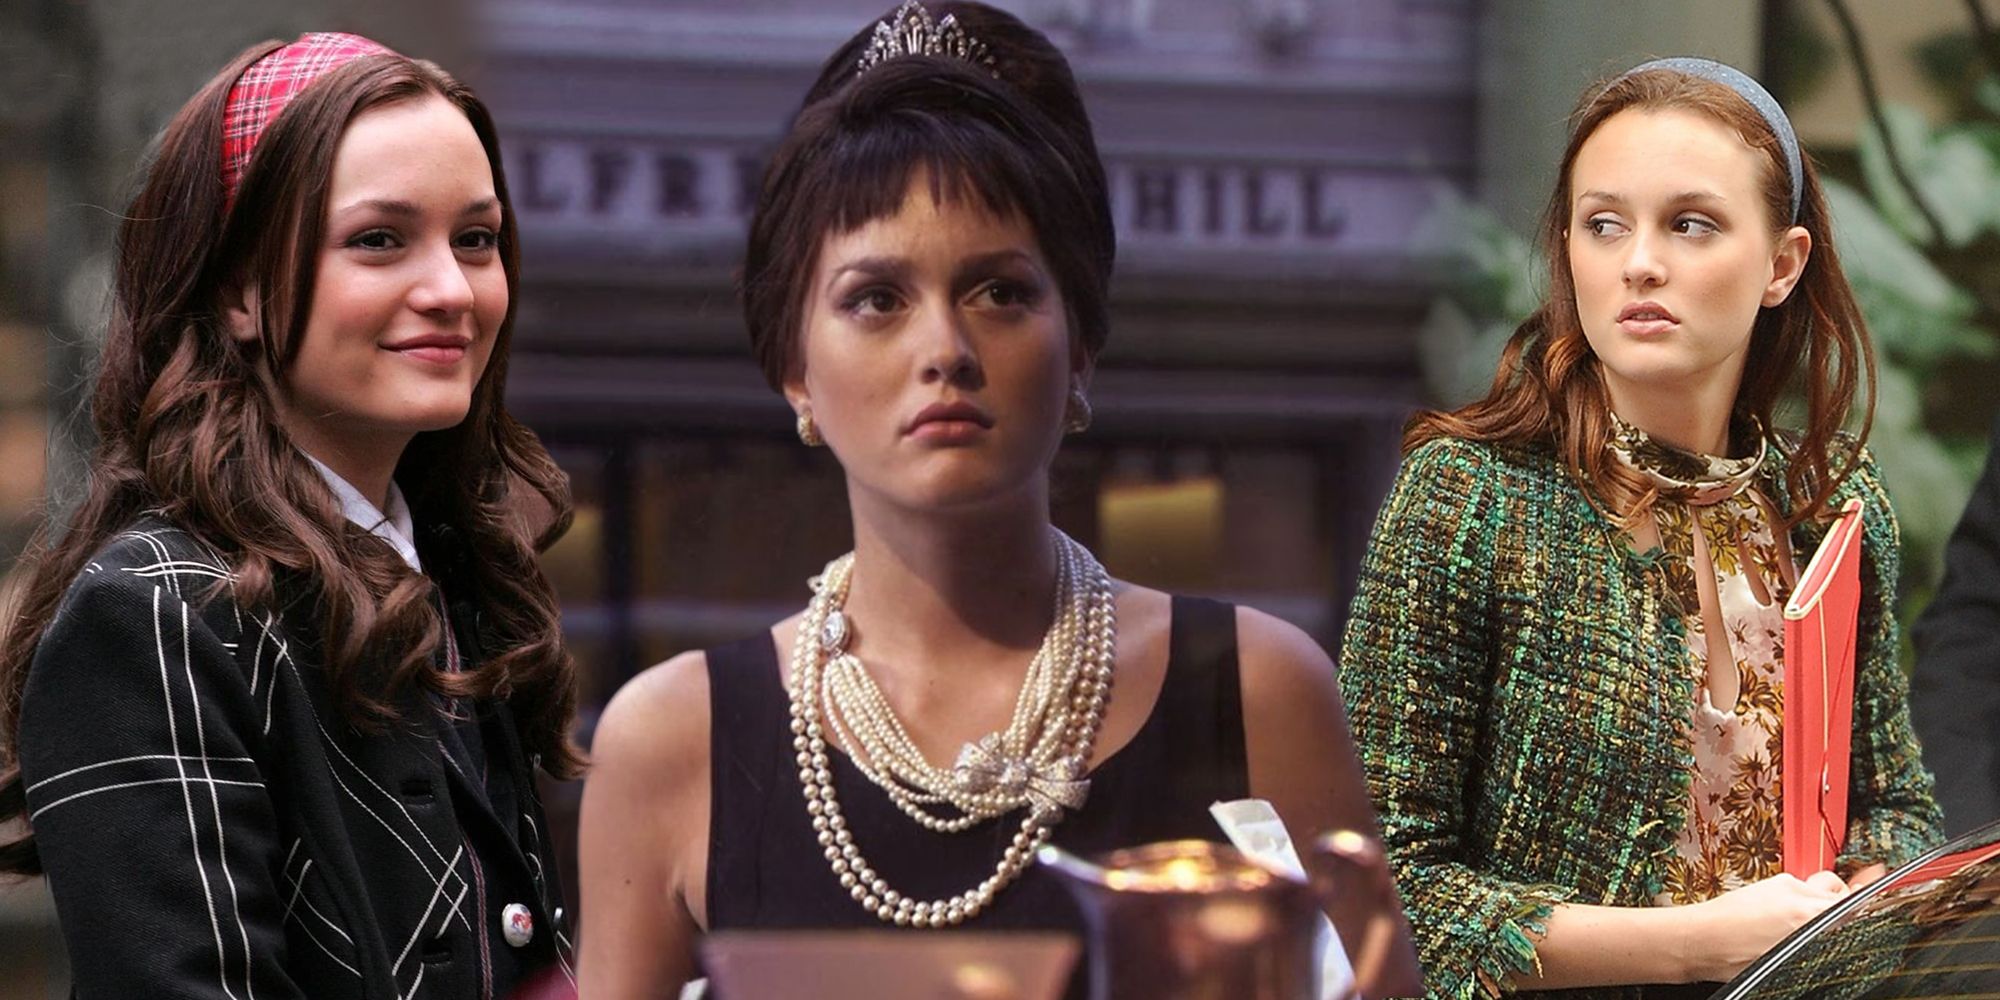 Blair in her iconic headbands and blazers in three Gossip Girl images, including one of her as Audrey Hepburn